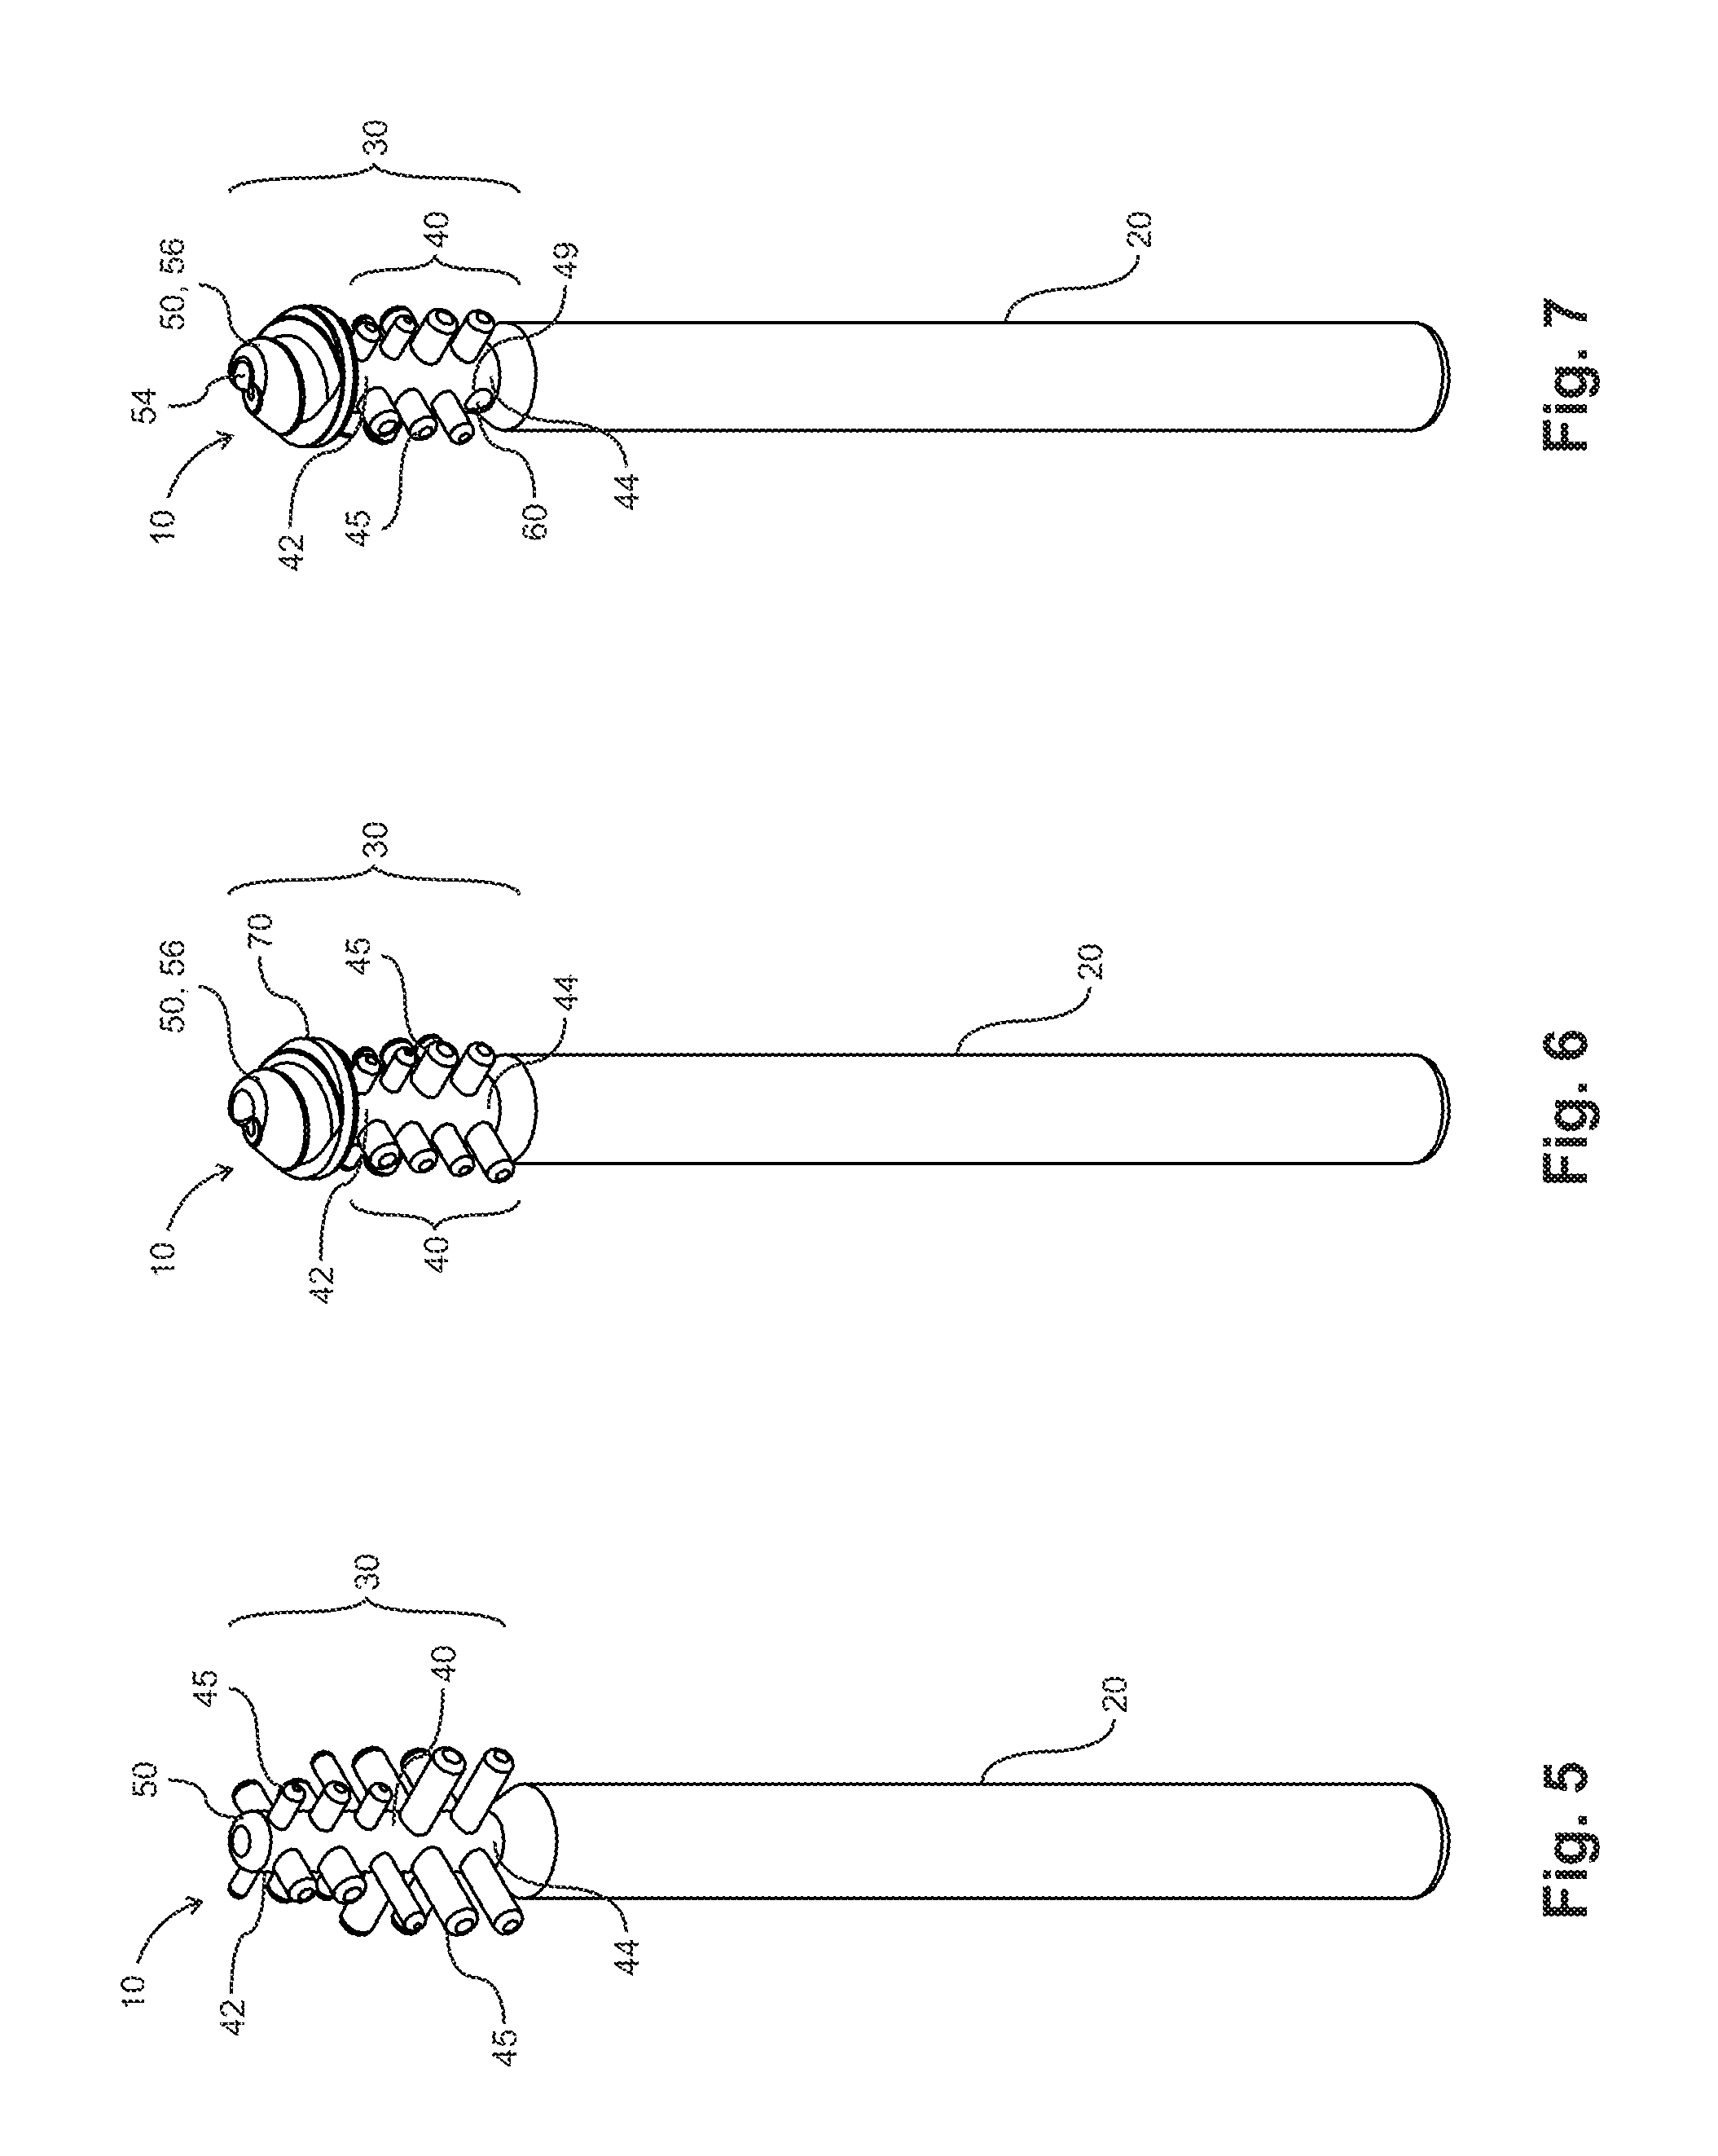 Device and method for removing earwax